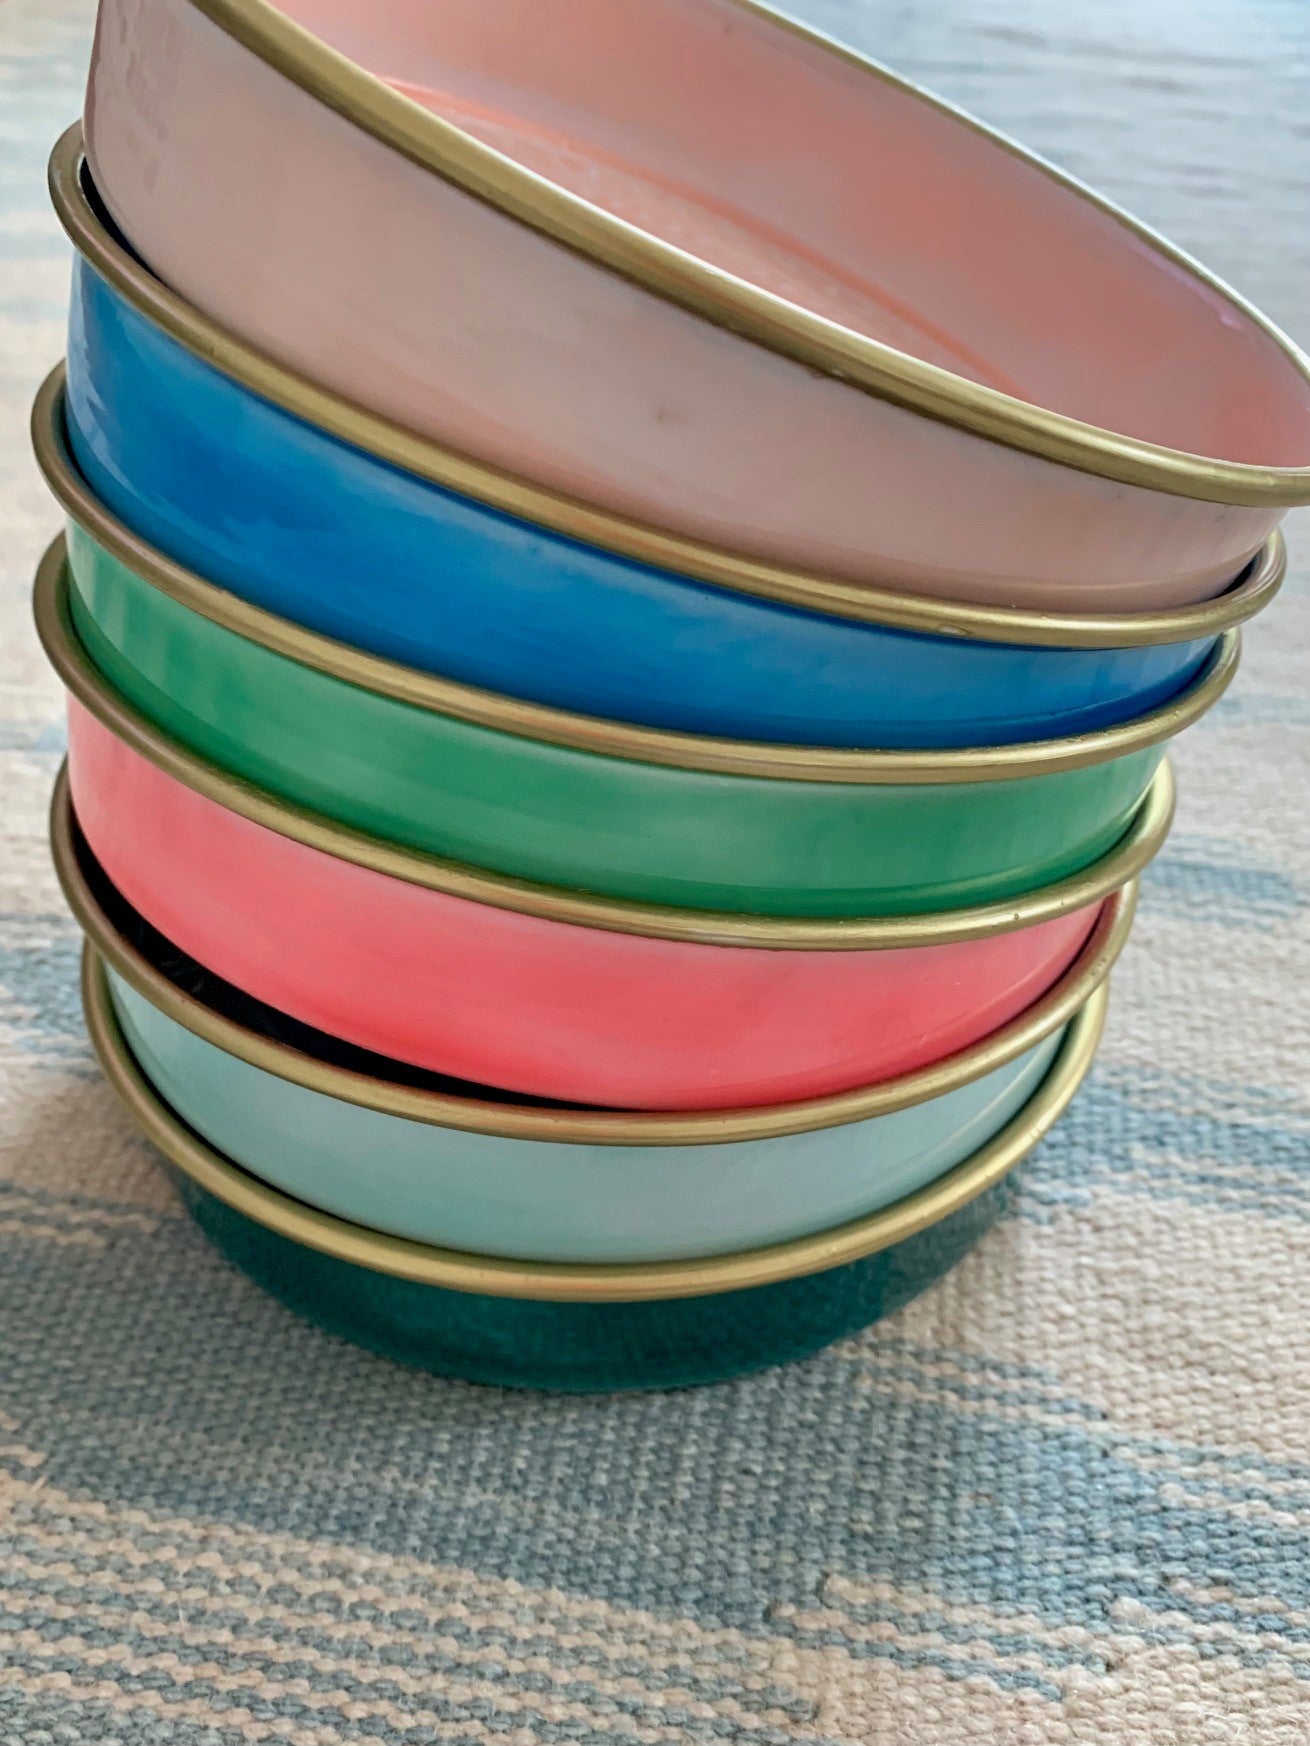 A collection of 6 colourful enamel trays stacked up.